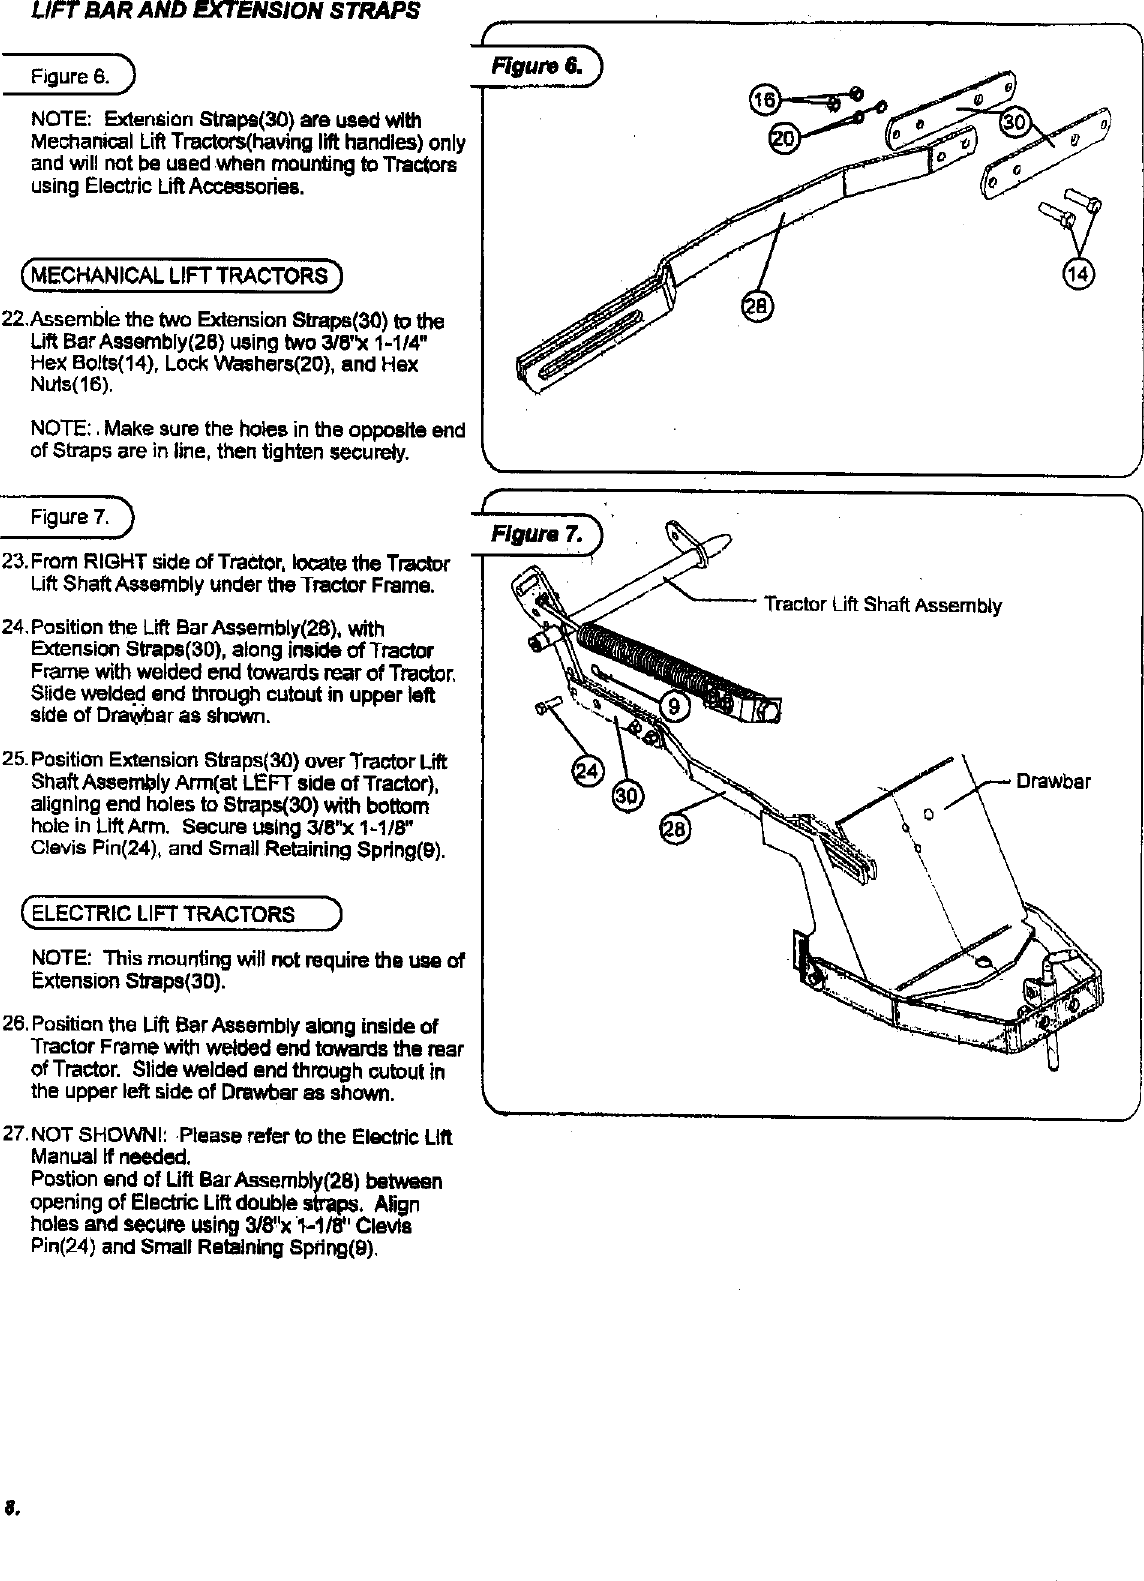 Page 8 of 11 - CRAFTSMAN  Tractor Attachments Manual L0304244